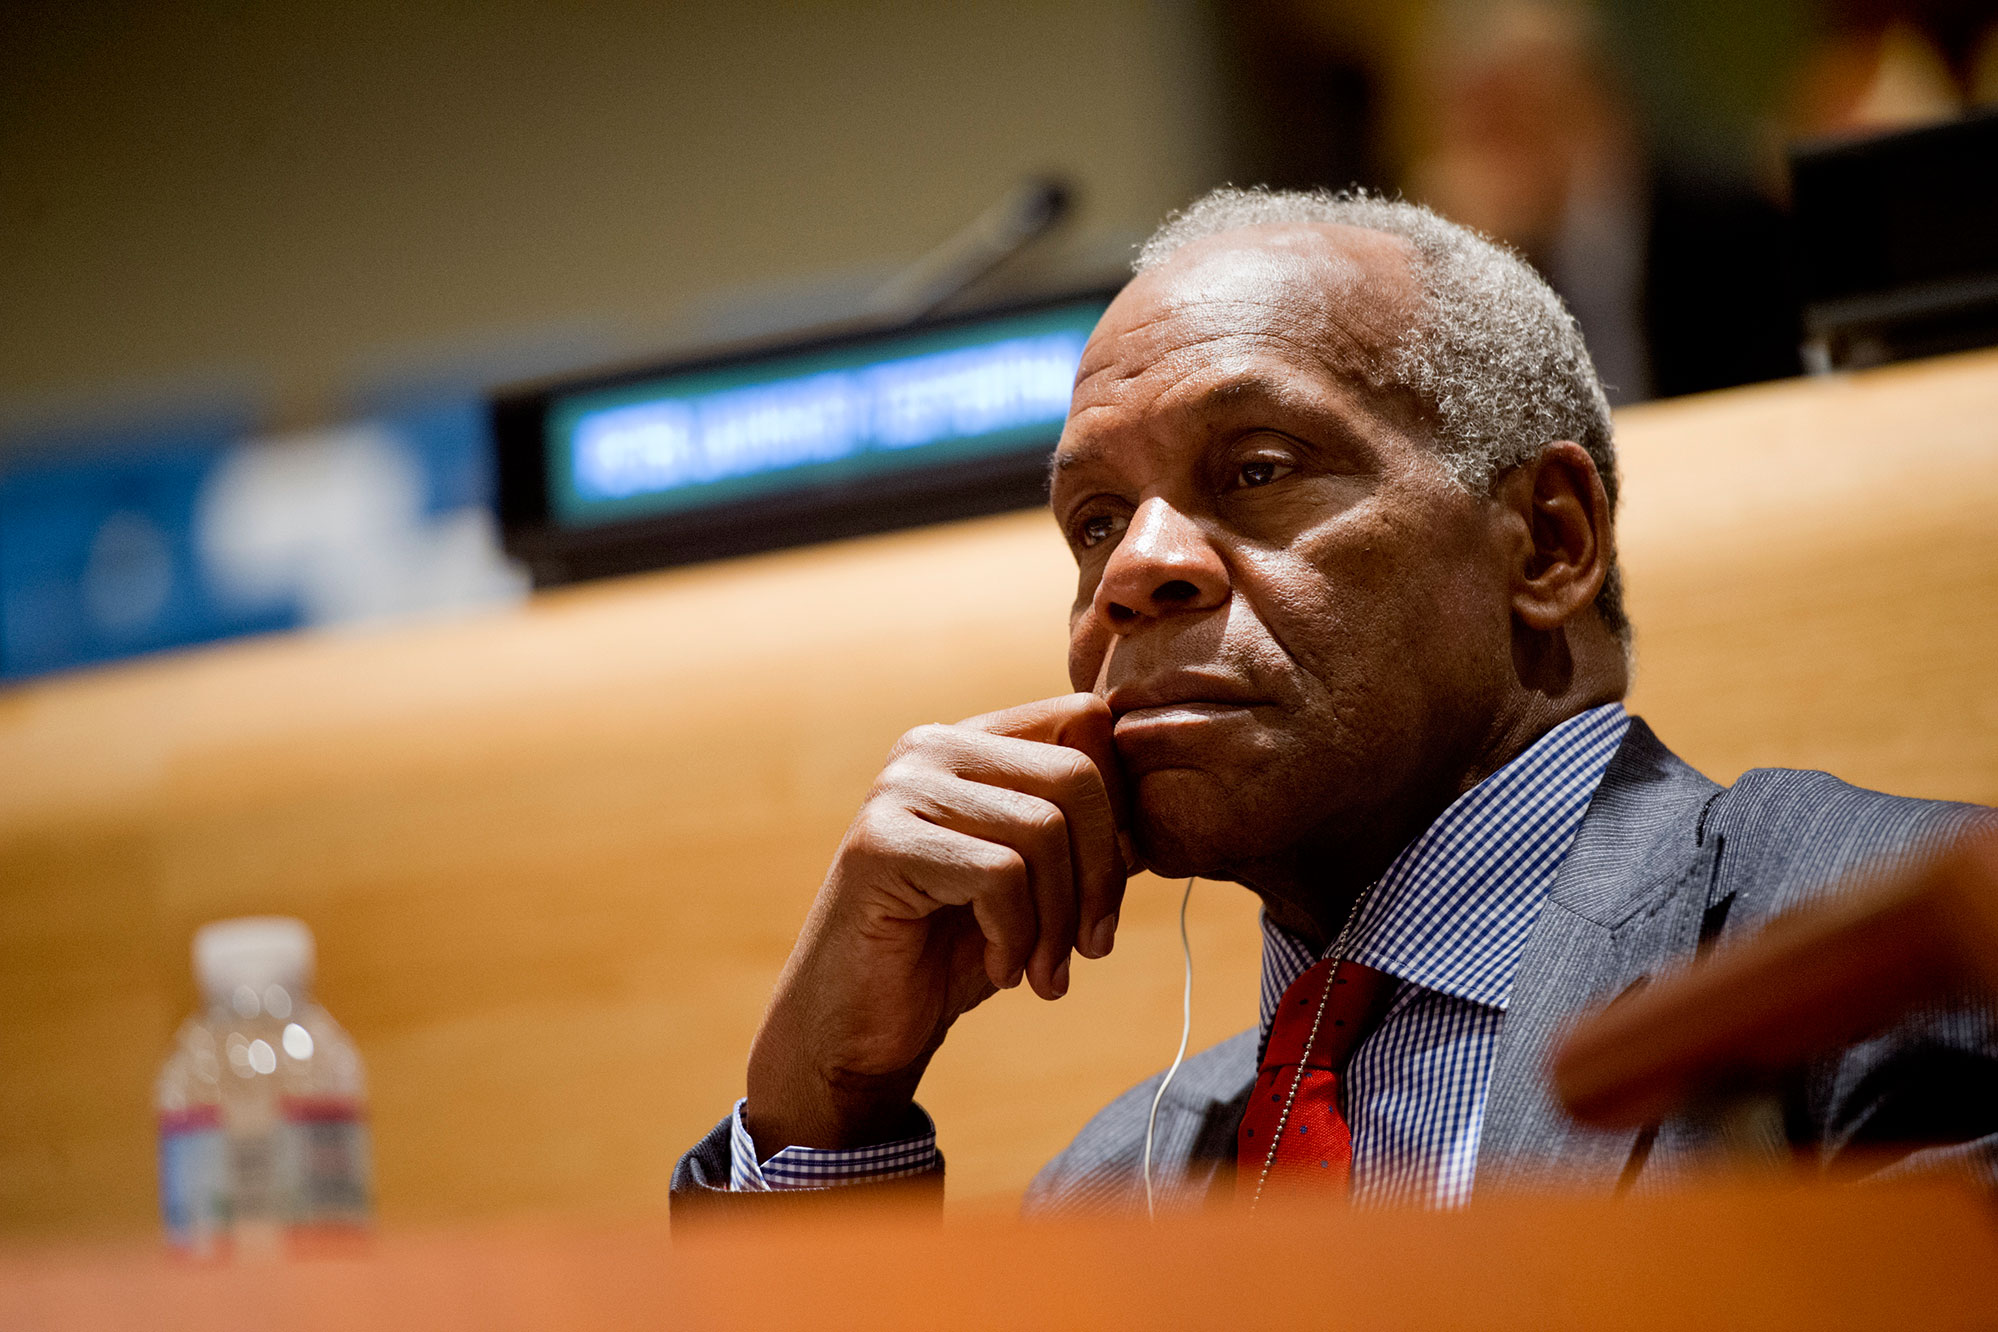 Danny Glover attends the Special Meeting of the General Assembly. UN Photo/Amanda Voisard